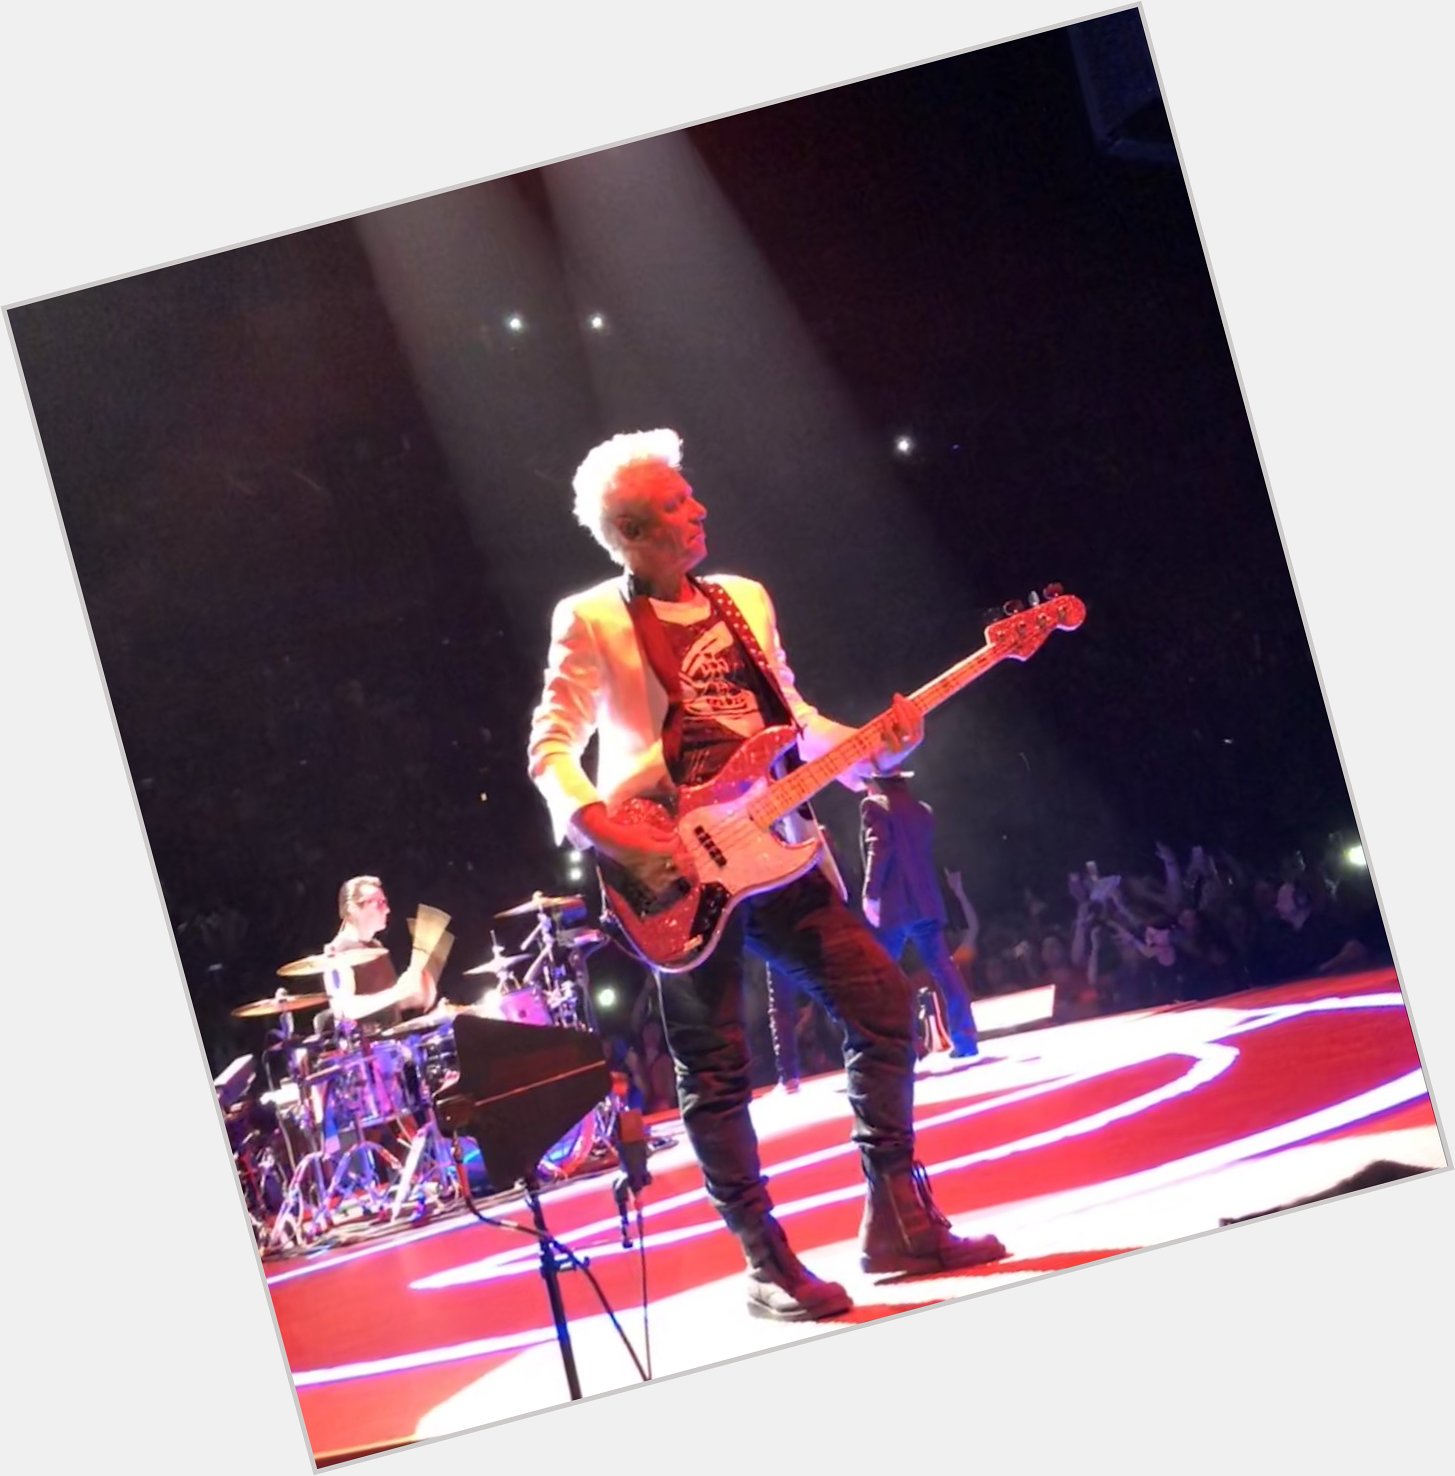 Happy birthday to the best bass player in my life - Adam Clayton. 